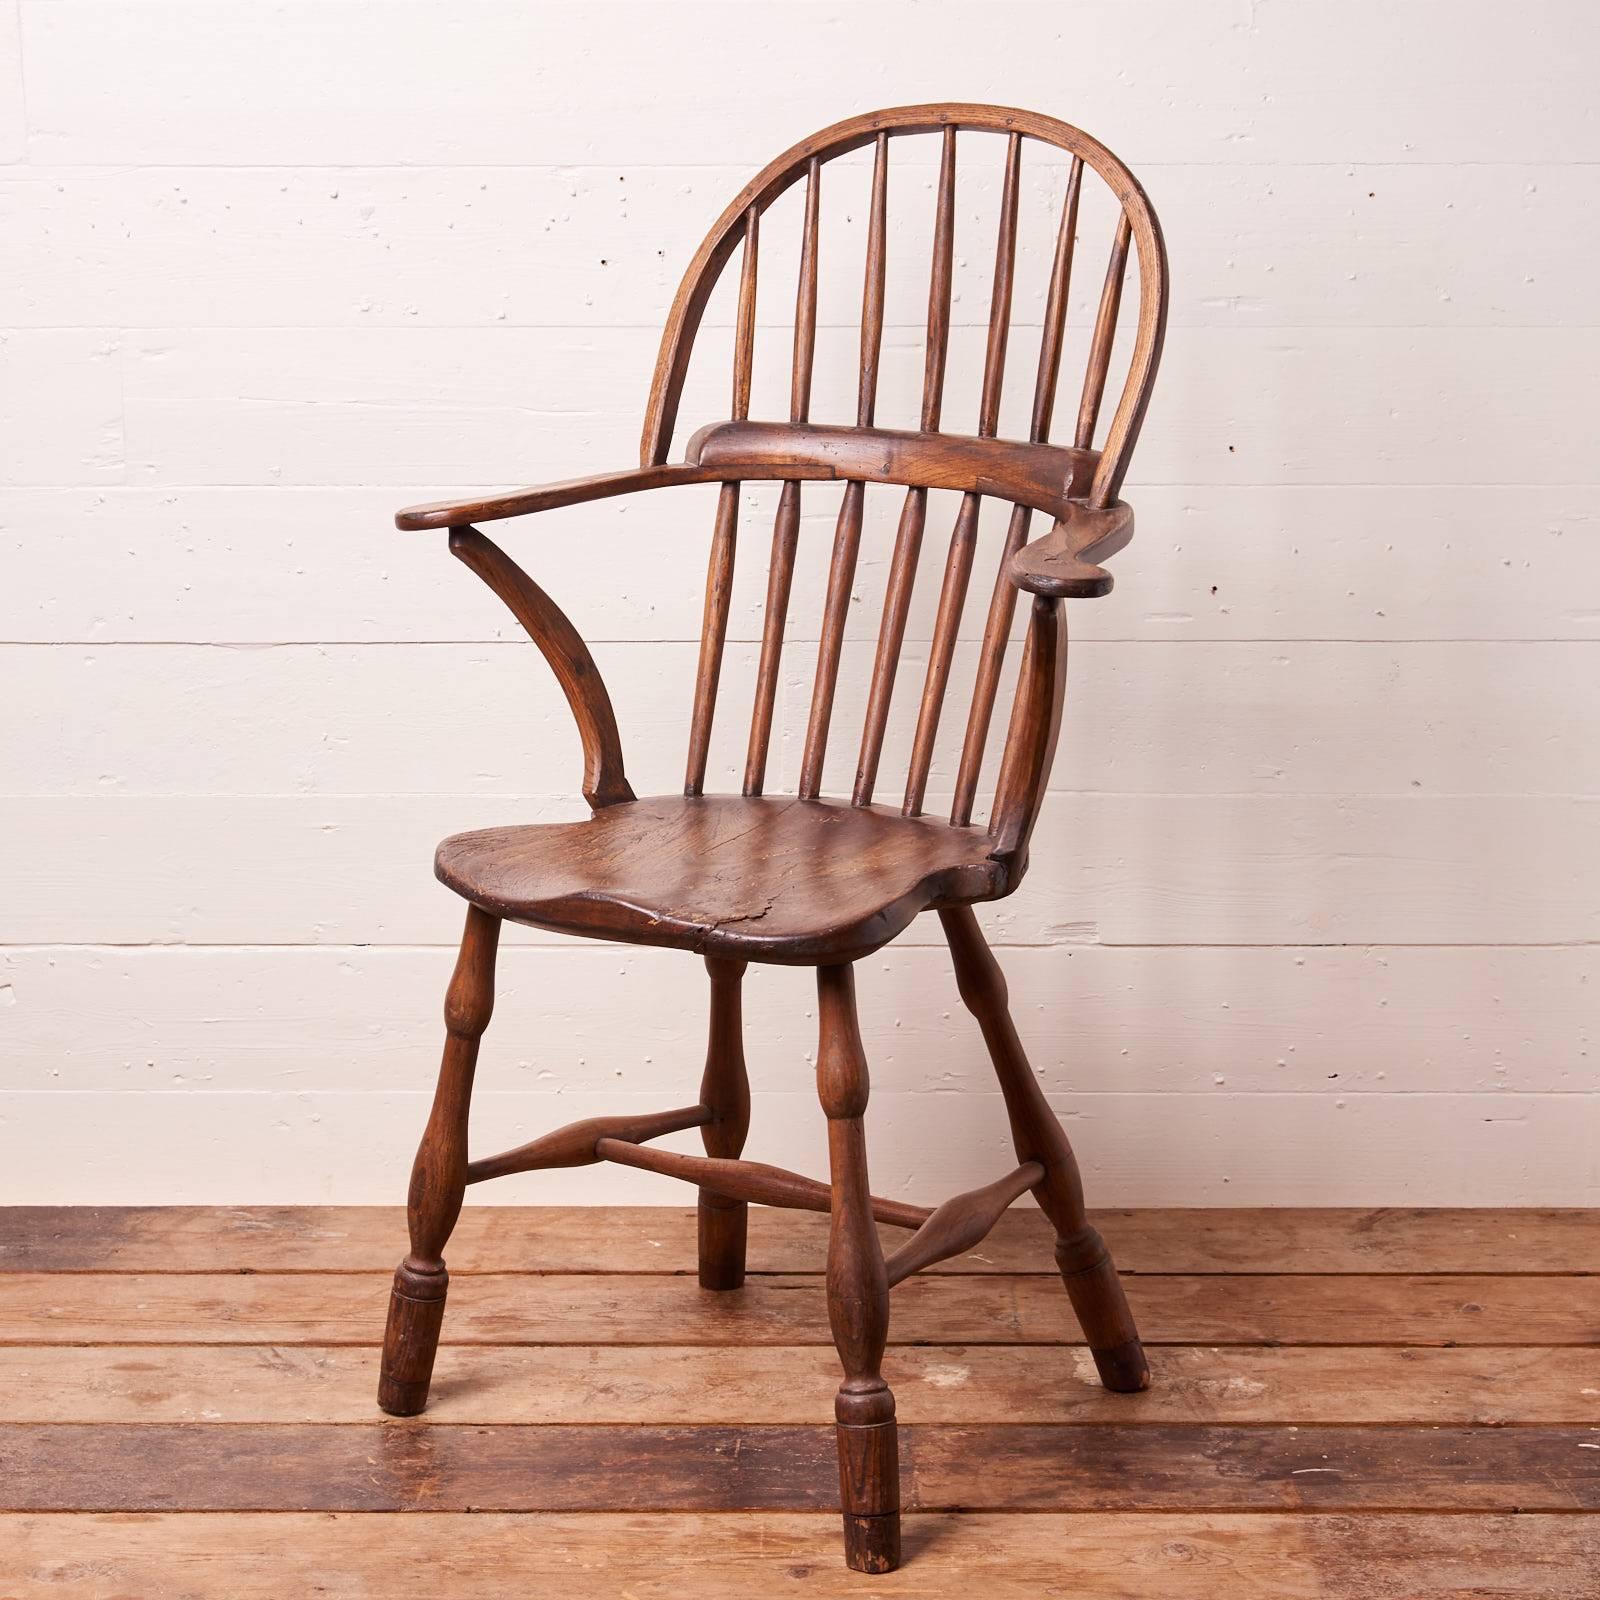 A bodgers windsor chair made from pit sawn elm and ash.